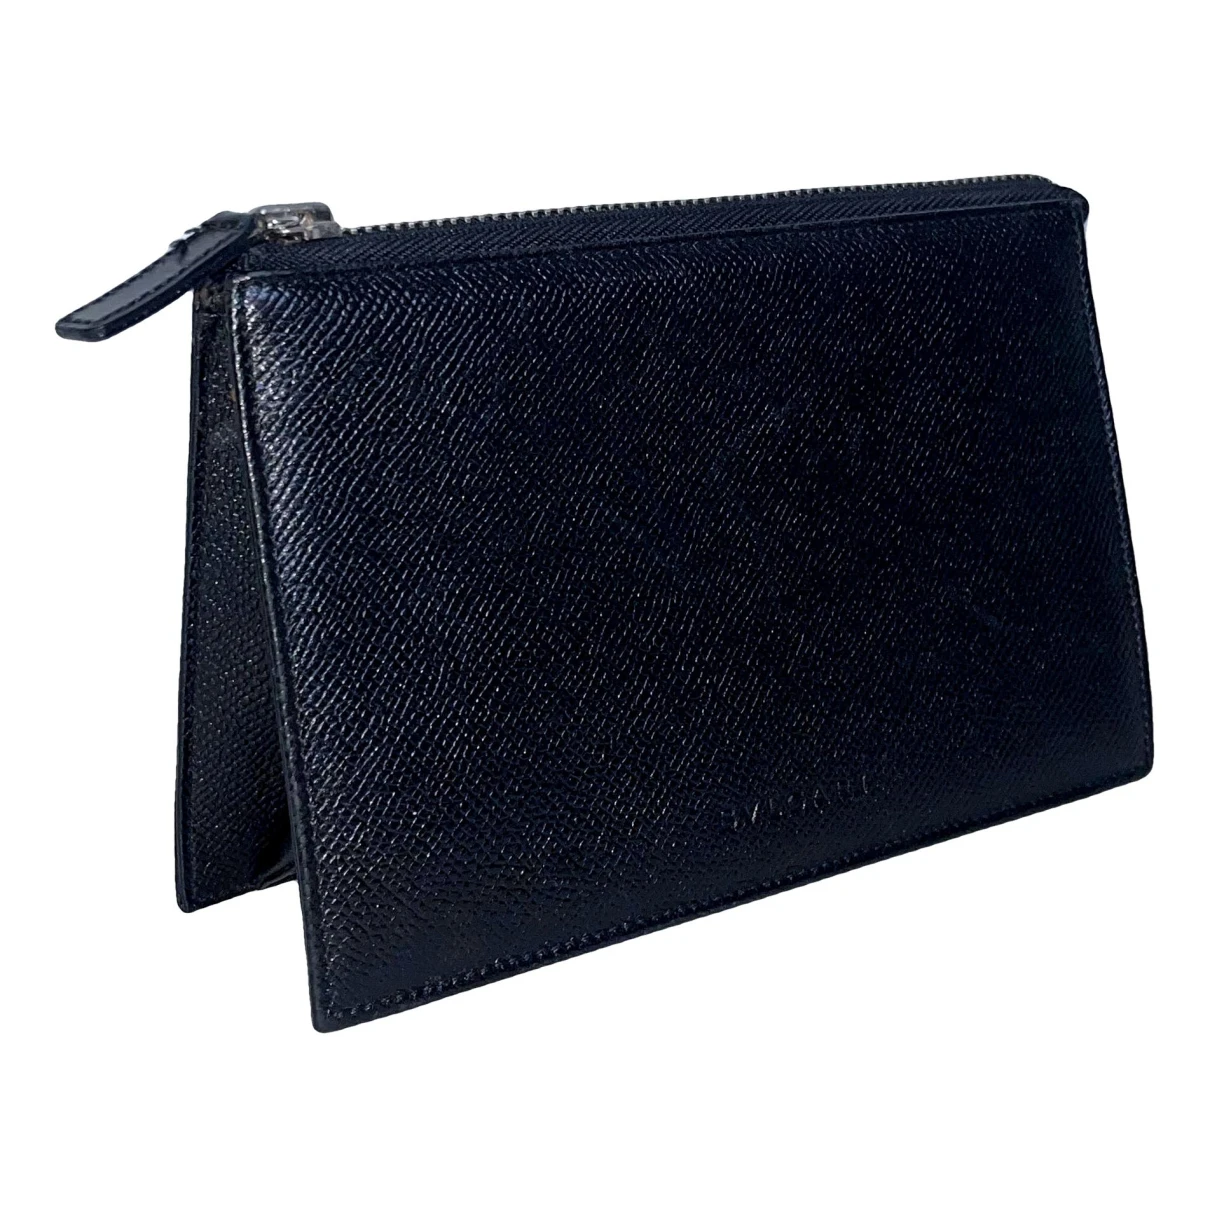 Pre-owned Bvlgari Leather Clutch In Black